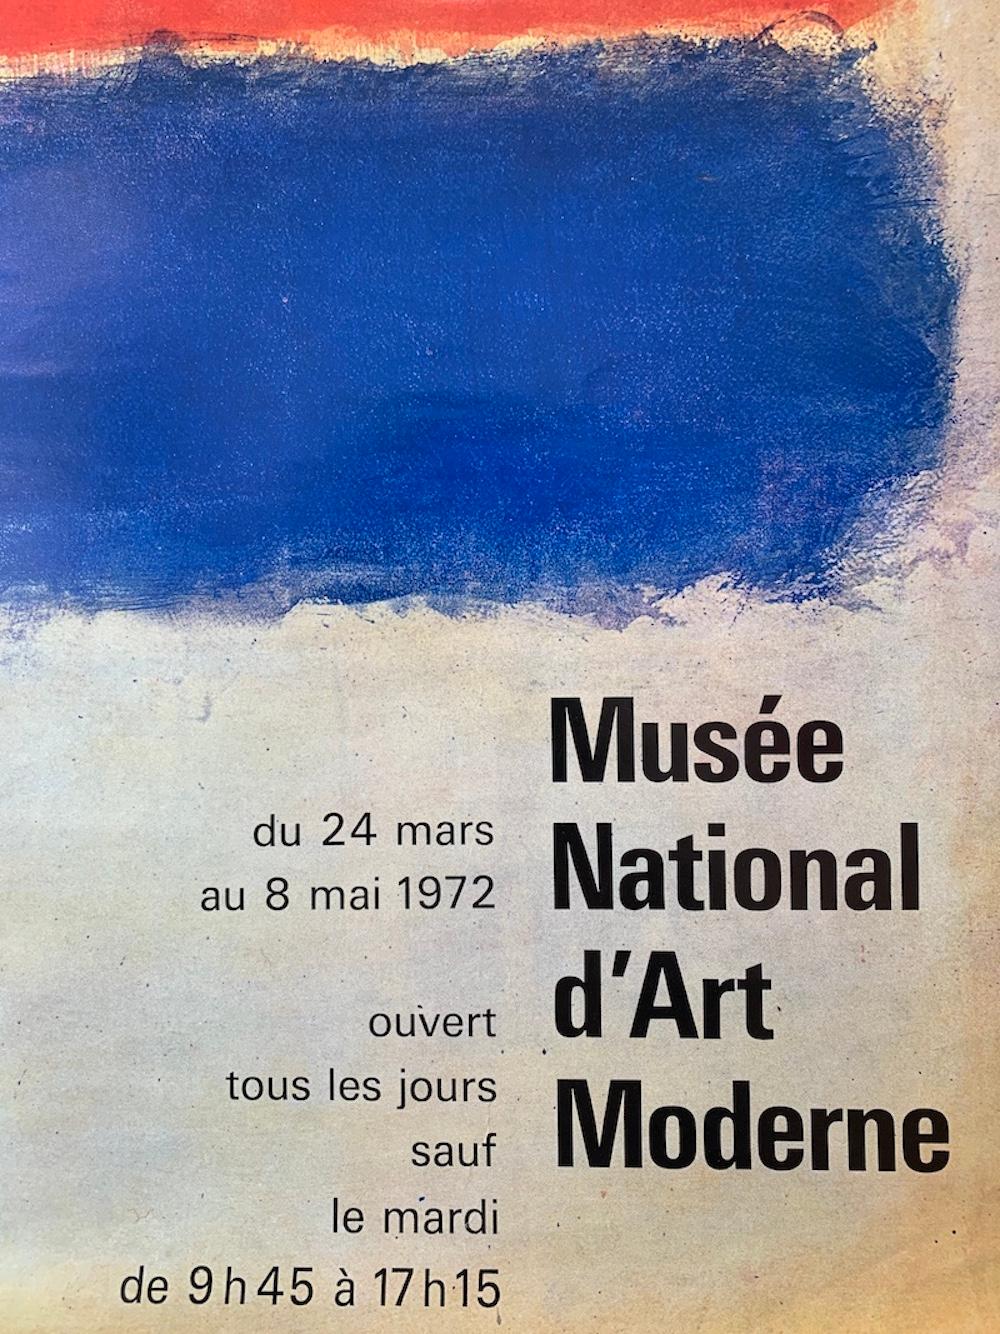 French Mark Rothko, 'Musee National D'art Moderne' Original Vintage Exhibition Poster